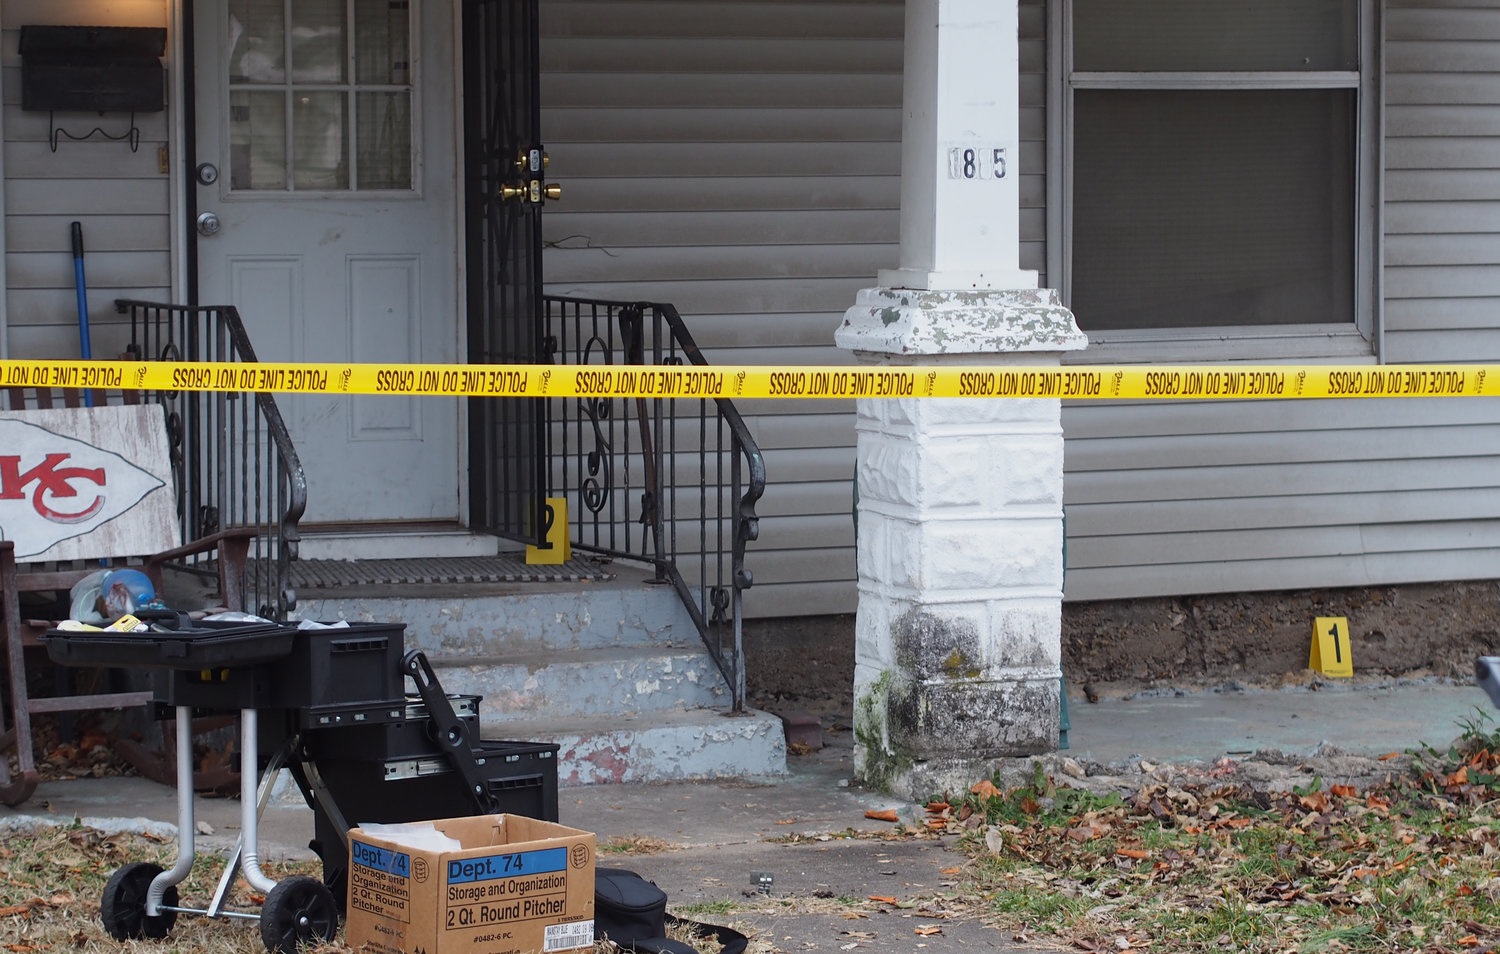 At least four shell-casing markers were found on the front porch where Tylar Simon was murdered Friday morning.